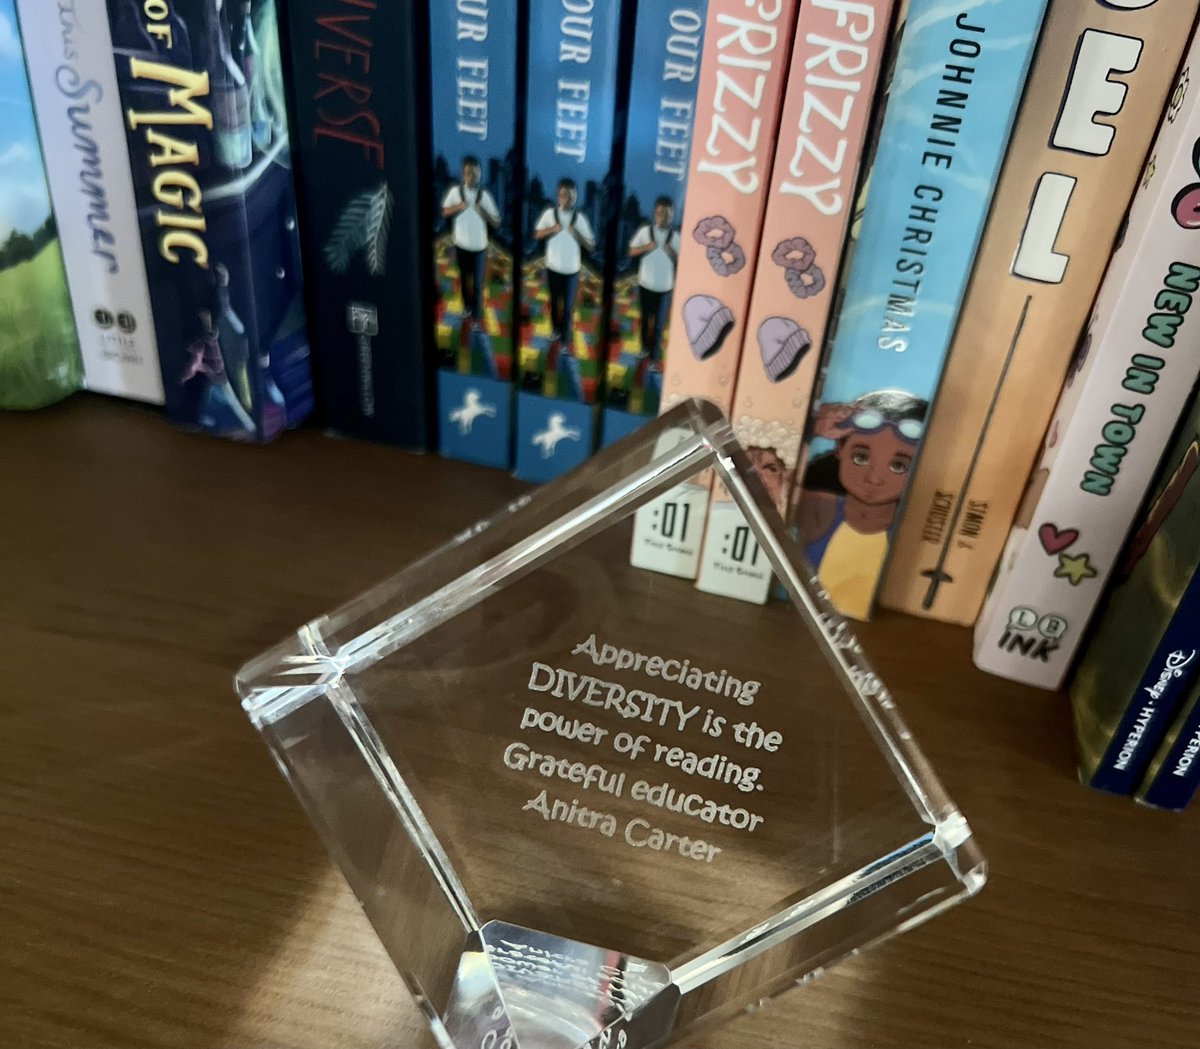 “Appreciating DIVERSITY is the power of reading.” We received this gift today from one of our Florida educators! ❤️📚Thank you for recognizing our literacy mission! #LiteracyLeaders #GiveKidsBooksLikeMe #DiverseKidLit